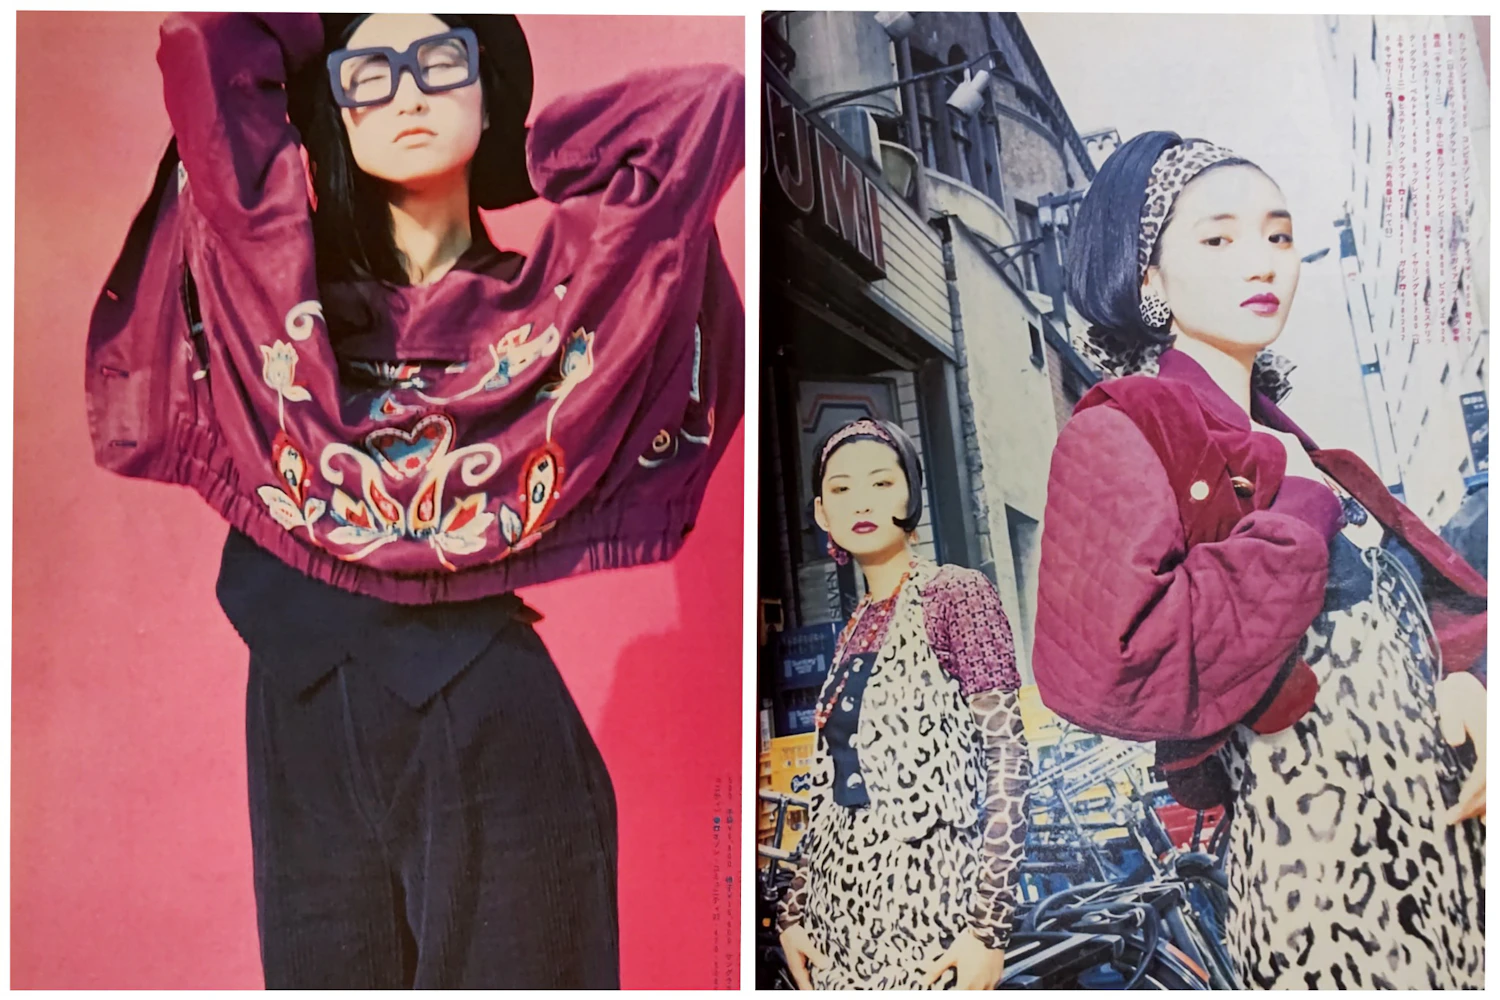 Right is OZONE COMMUNITY, left is HYSTERIC GLAMOUR. Frequently featured in "CUTiE" at the time (1989 / "CUTiE Bessatsu Takarajima Vol.6" / JICC Publishing Bureau)